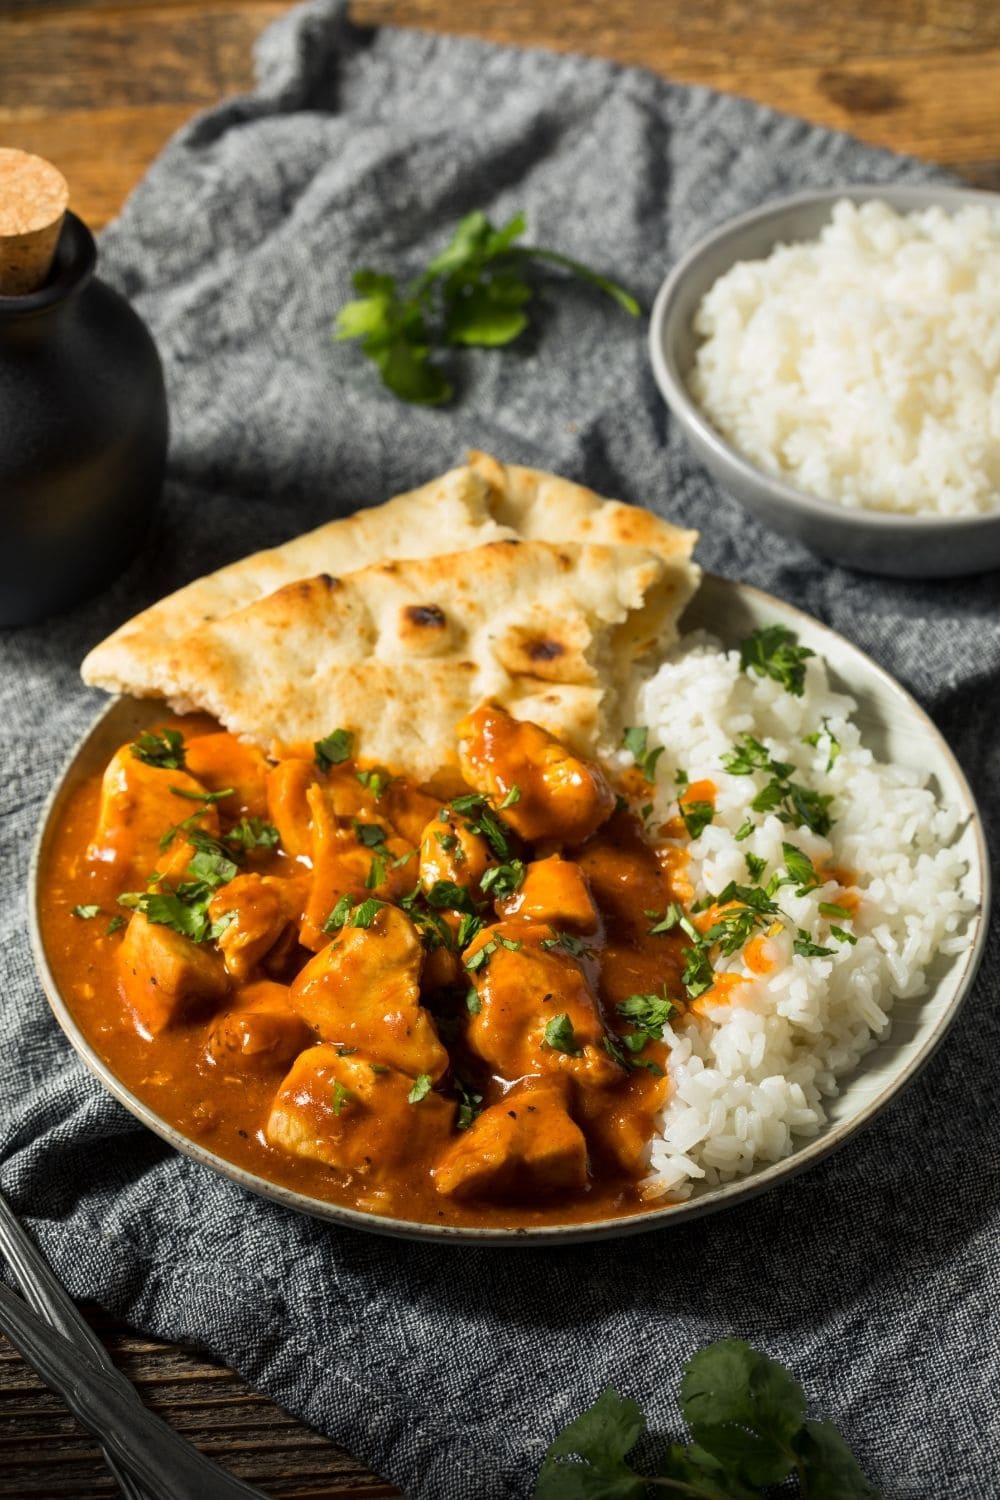 Buttered chicken with Naan bread and rice